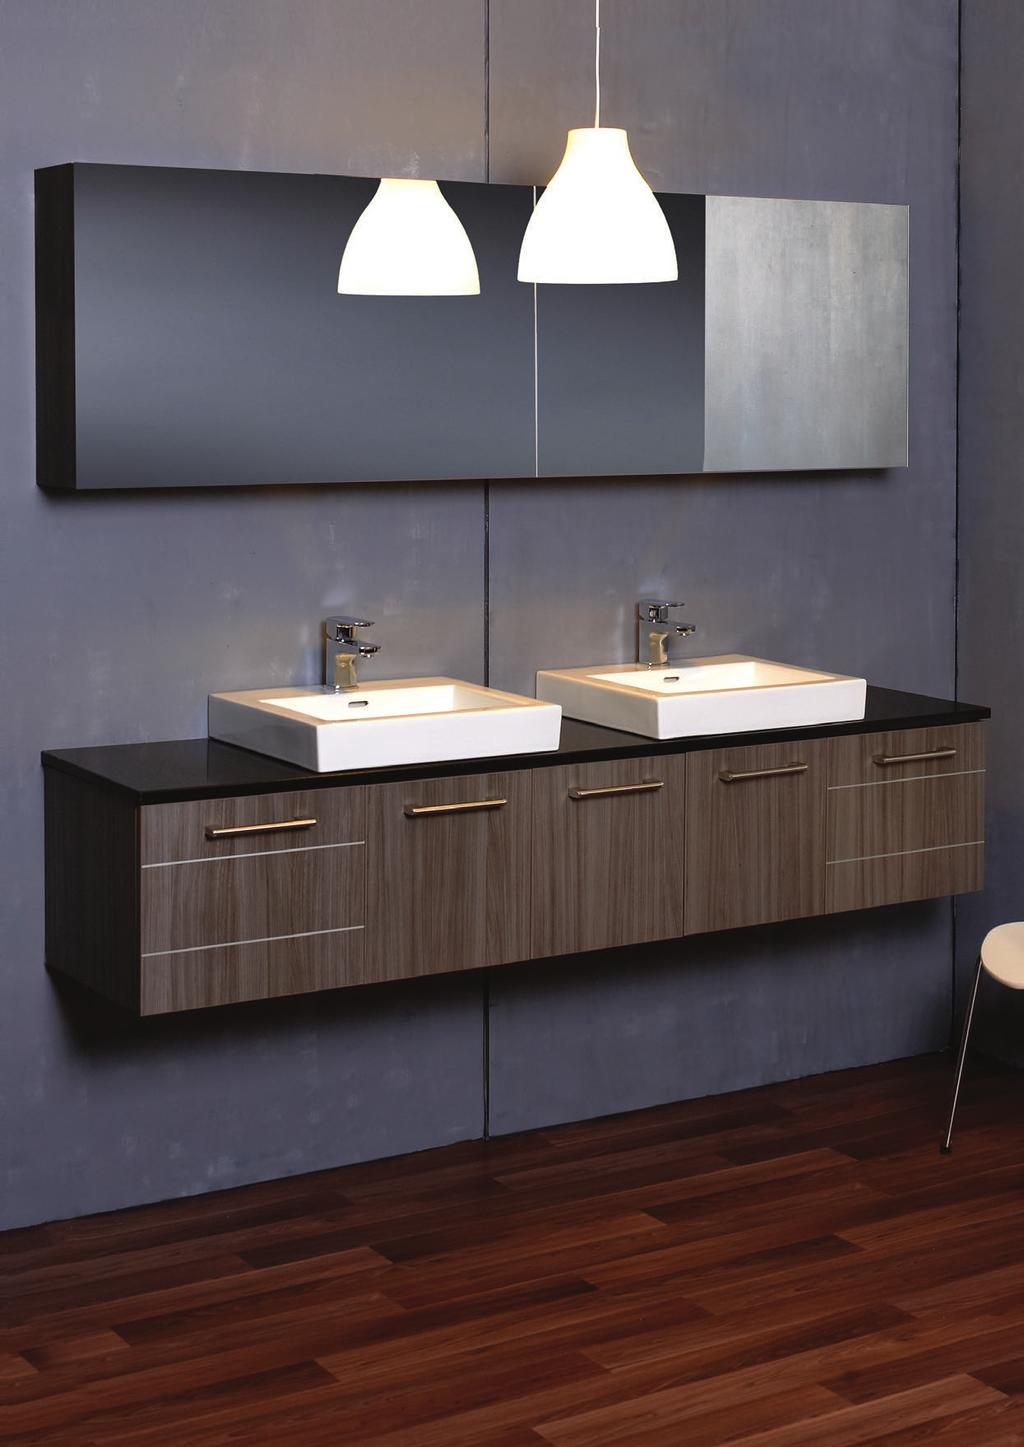 The Slab 1800 Cabinet and matching Mode shaving cabinet in Lustrous